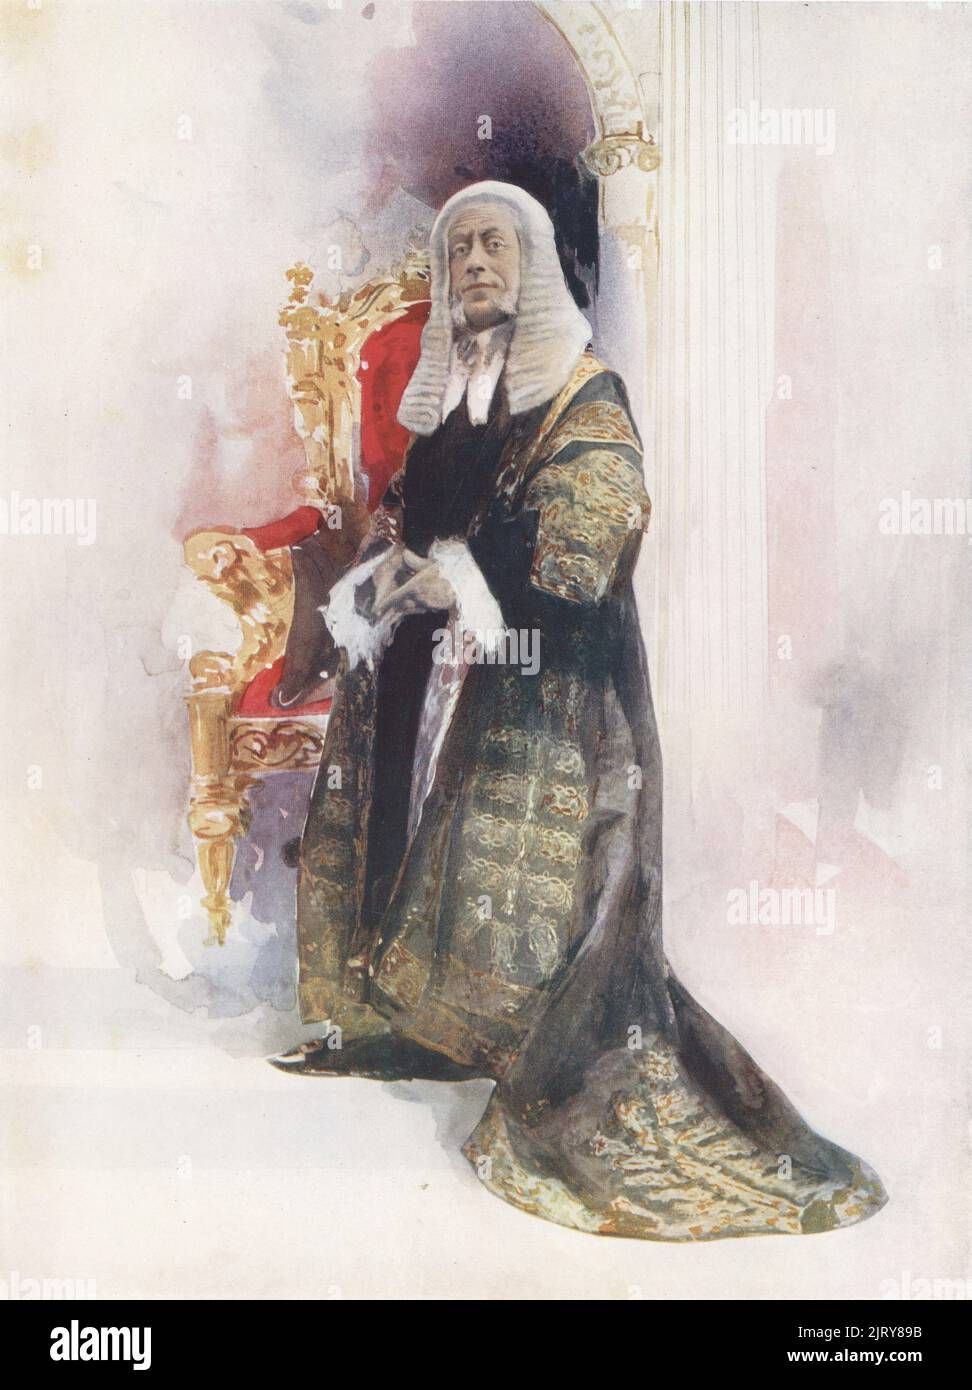 Walter Passmore as the Lord Chancellor in Iolanthe, the Savoy comic opera by Gilbert and Sullivan, 1901. Passmore, English singer and actor in comic baritone roles, 1867-1946. Photograph by Alfred Ellis and Walery (Stanislaw Julian Ignacy). Colour printing of a hand-coloured illustration based on a monochrome photograph from George Newnes’s Players of the Day, London, 1905. Stock Photo